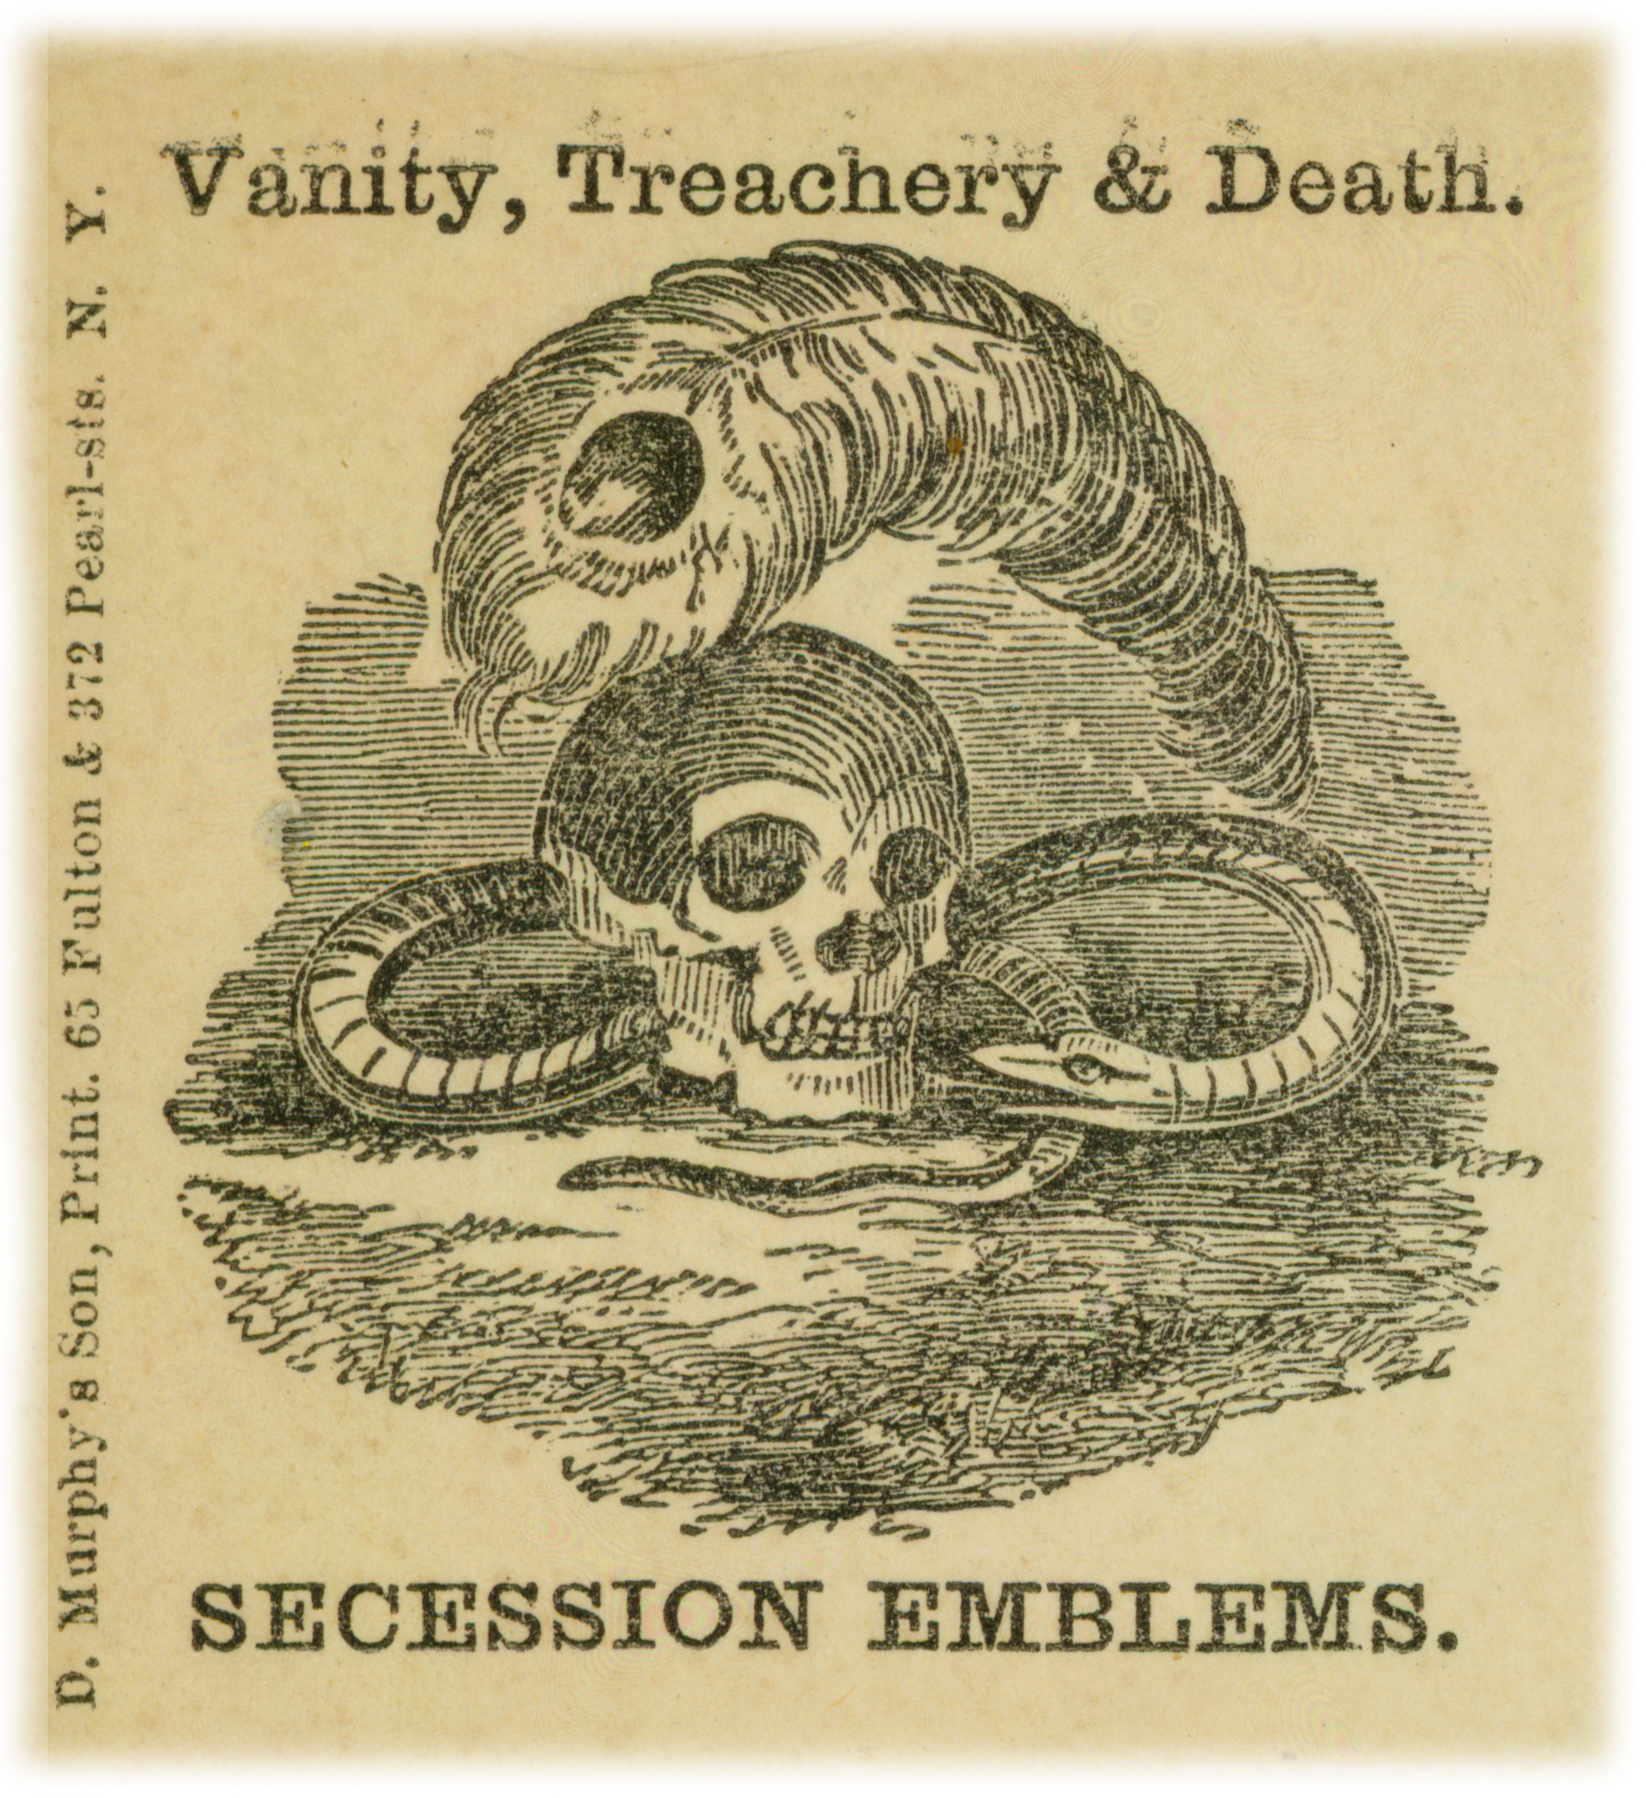 Drawing of a peacock feather, skull, and snake. Text reads 'Vanity, Treachery & Death - Secession Emblems'